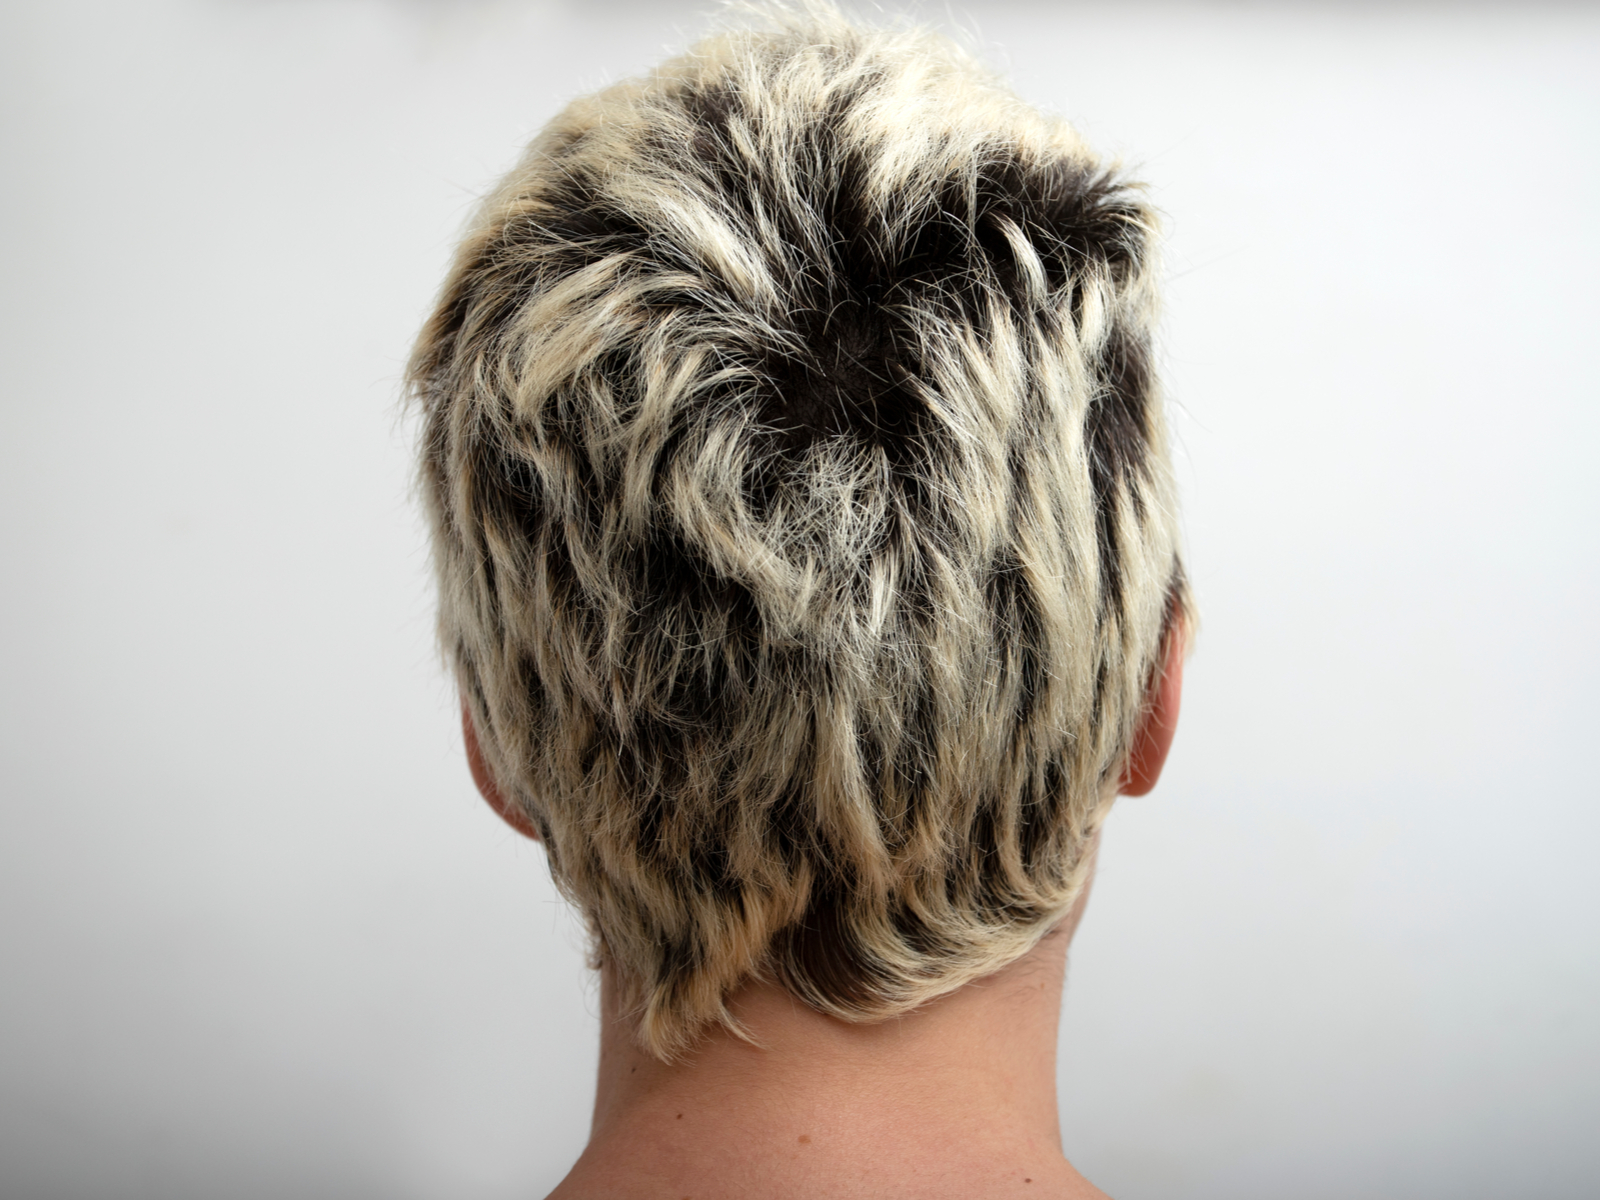 90s-Inspired Short Frosted Tips hairstyle